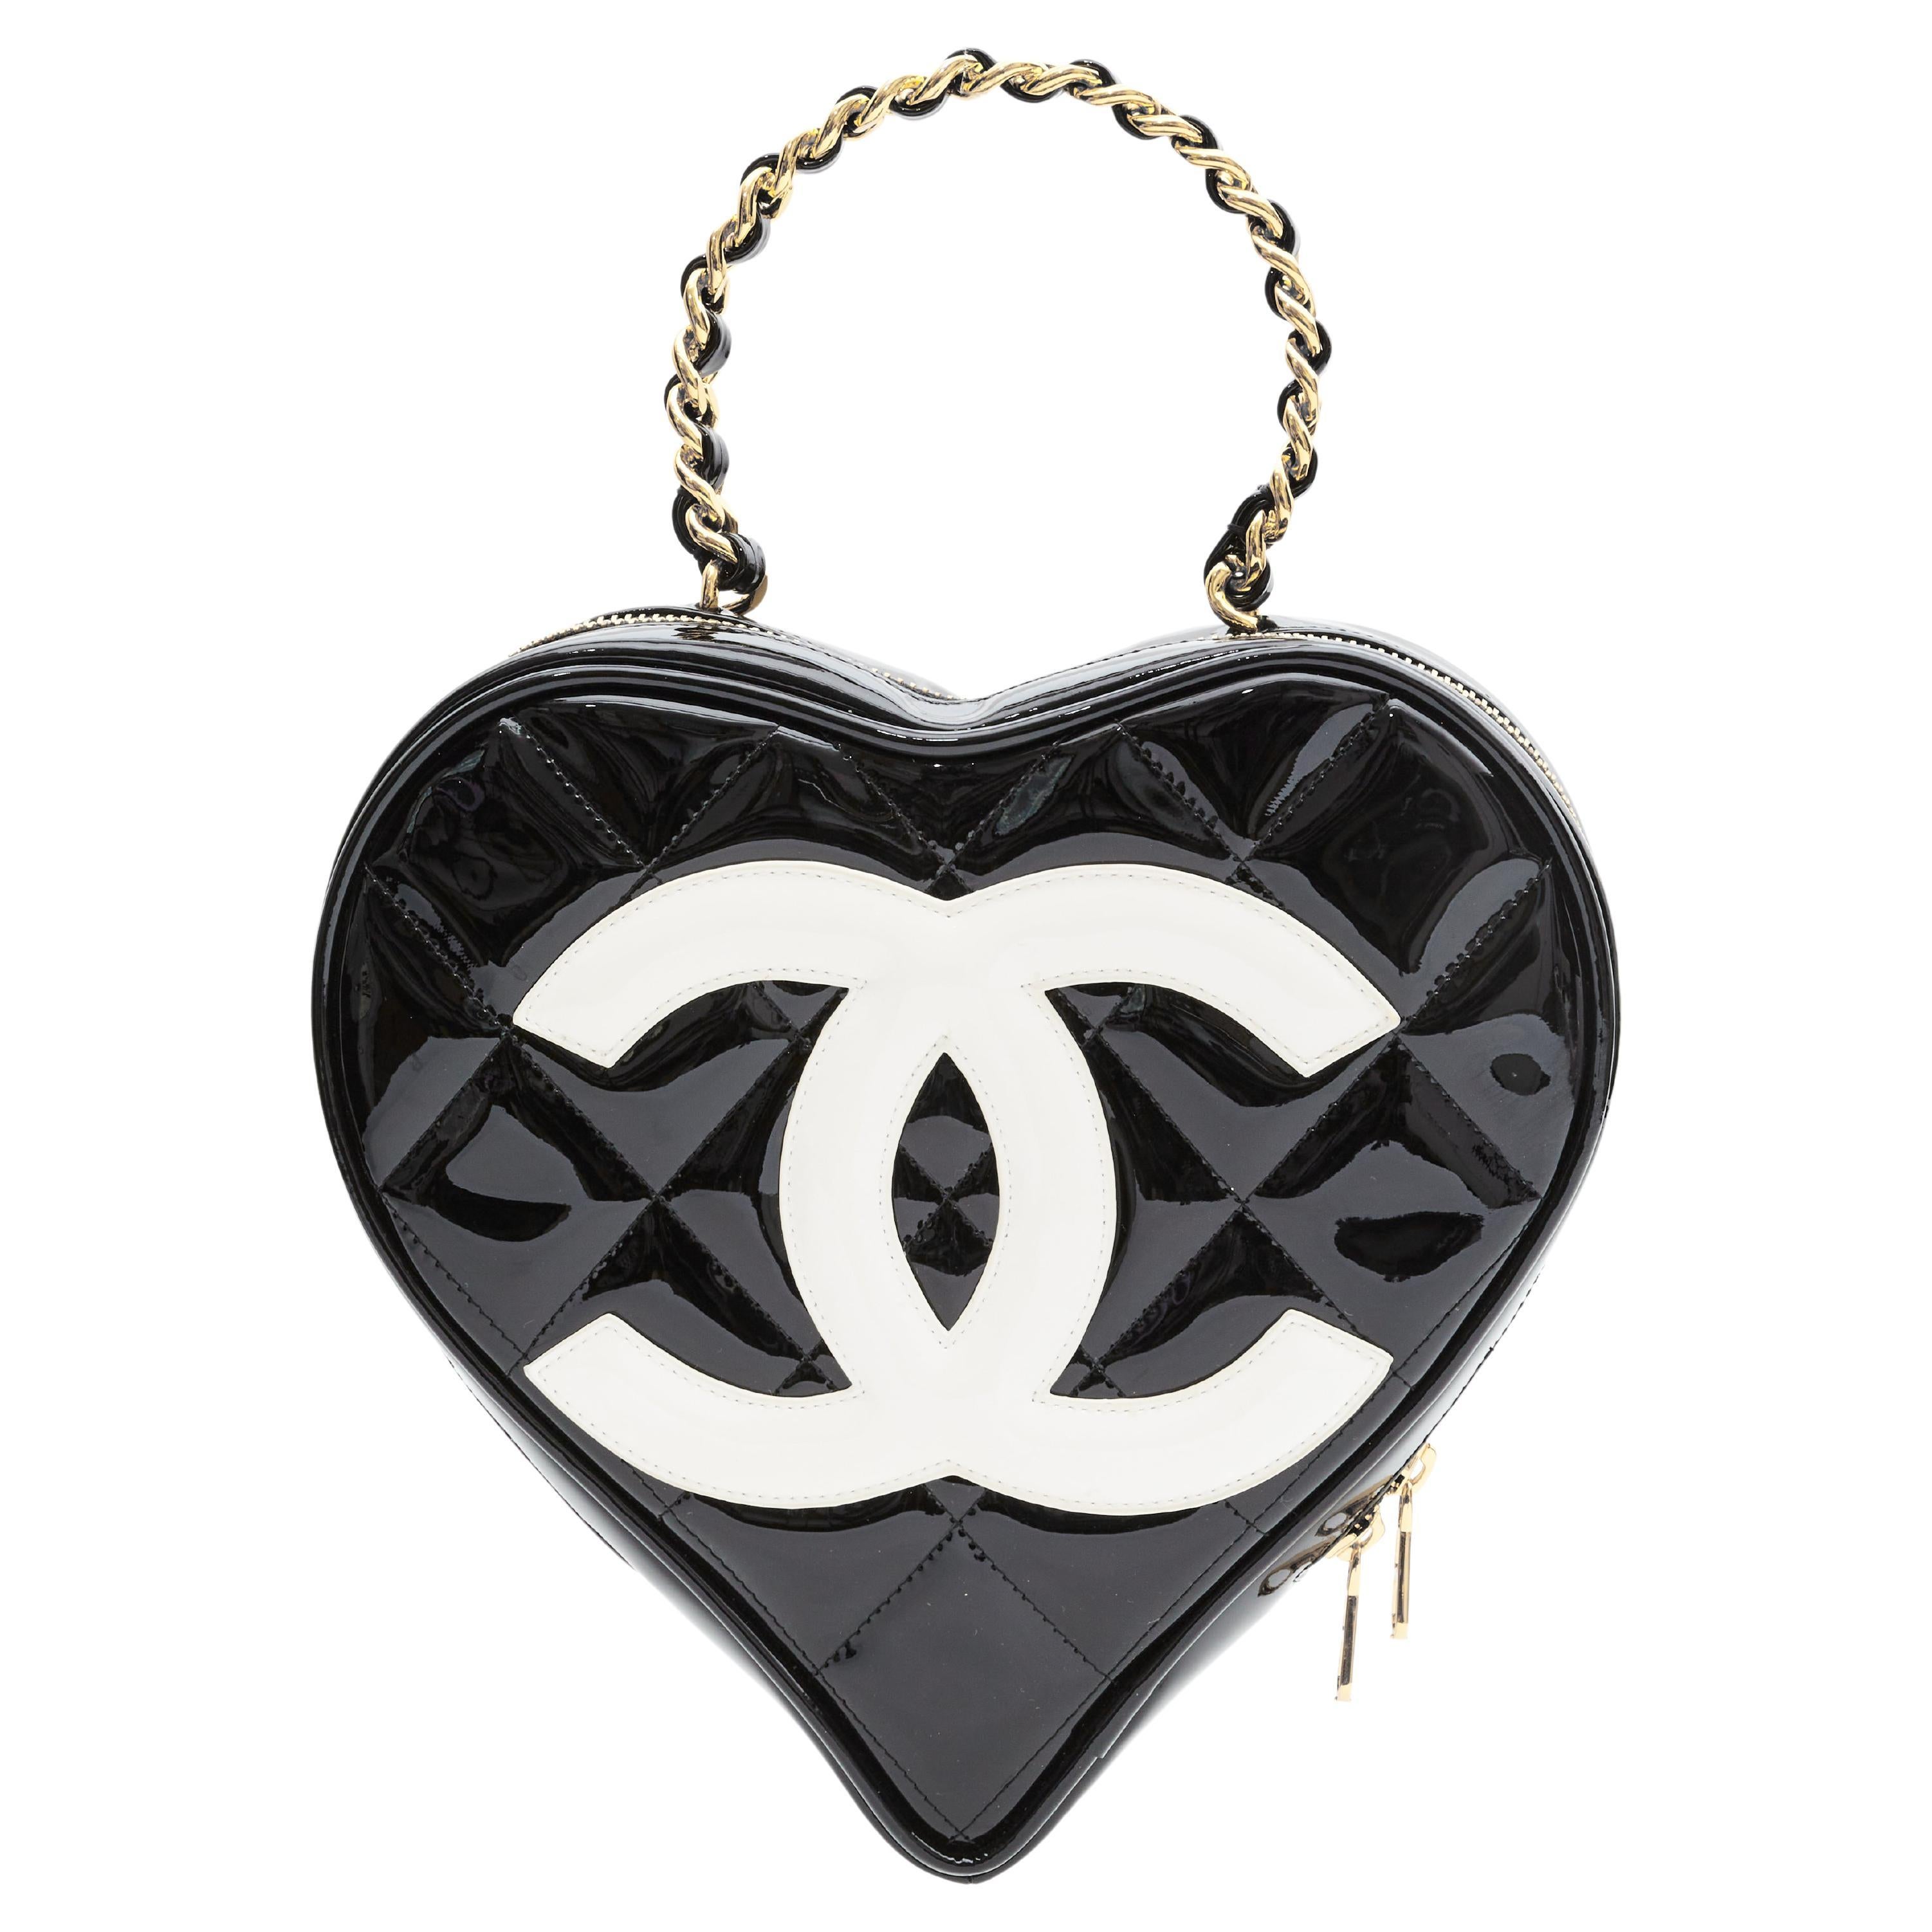 CHANEL * 1995 Black Patent Leather Heart Top Handle Bag 43543